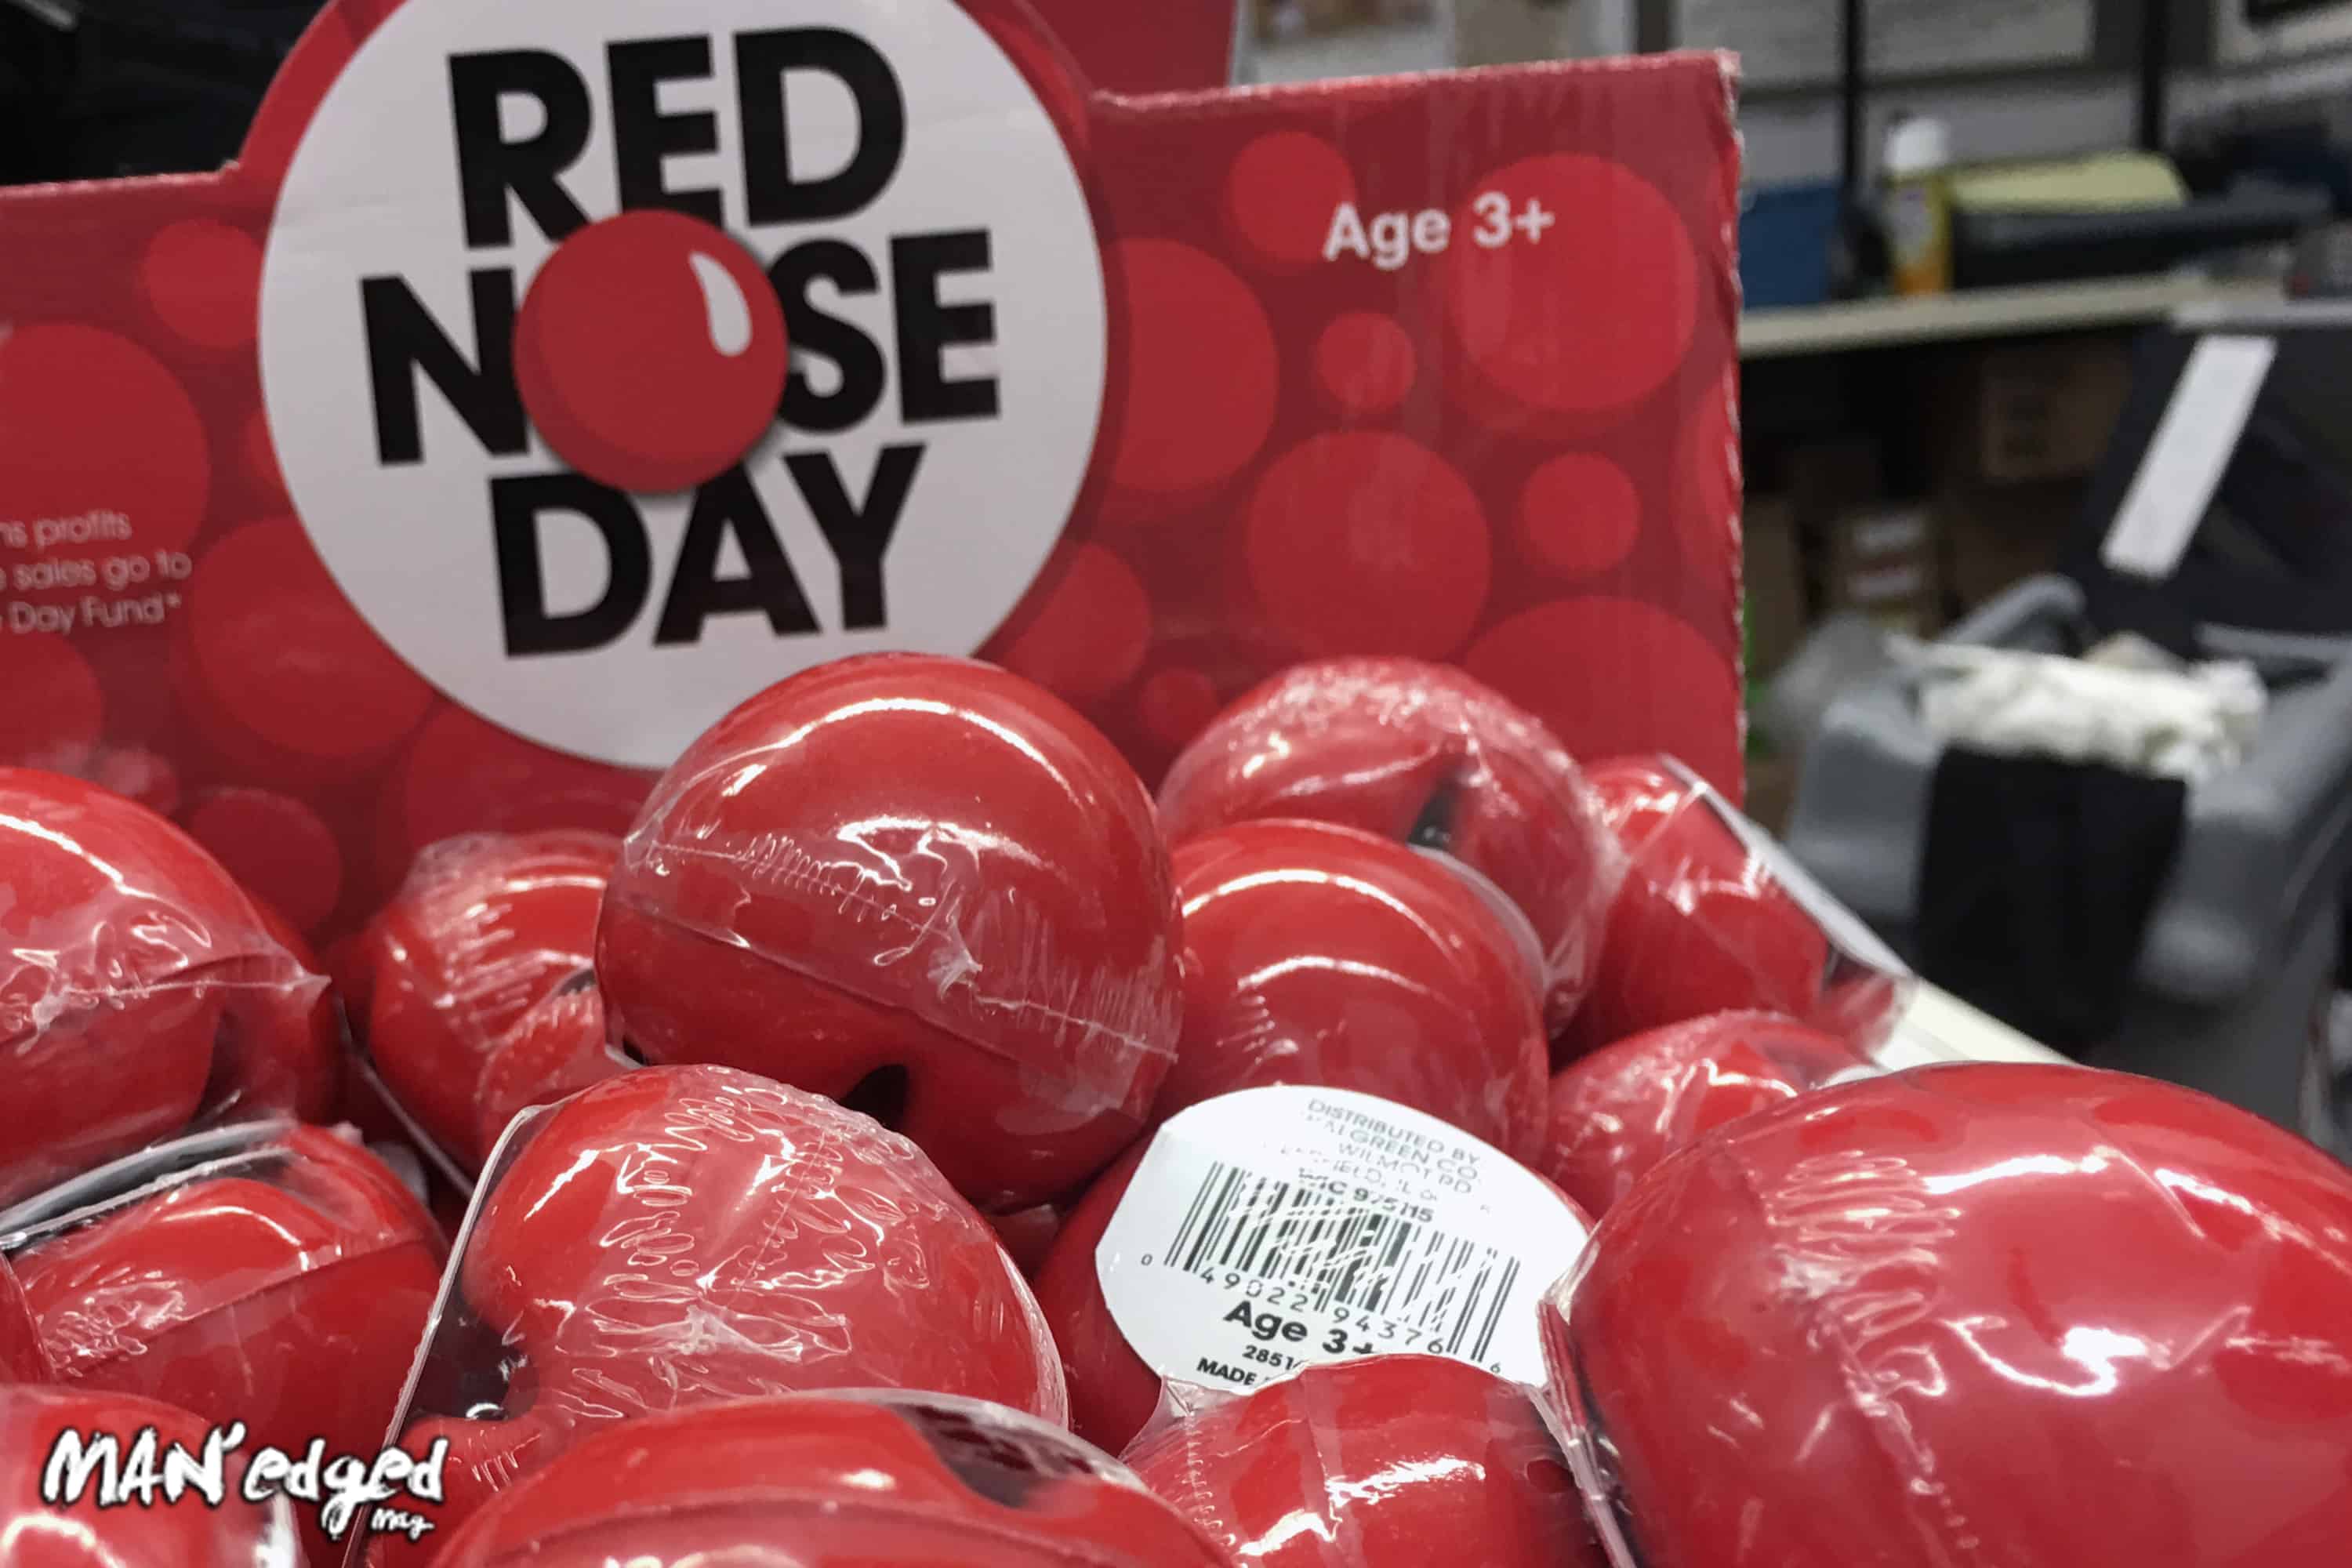 Red Noses sold Duane Reade for Red Nose Day